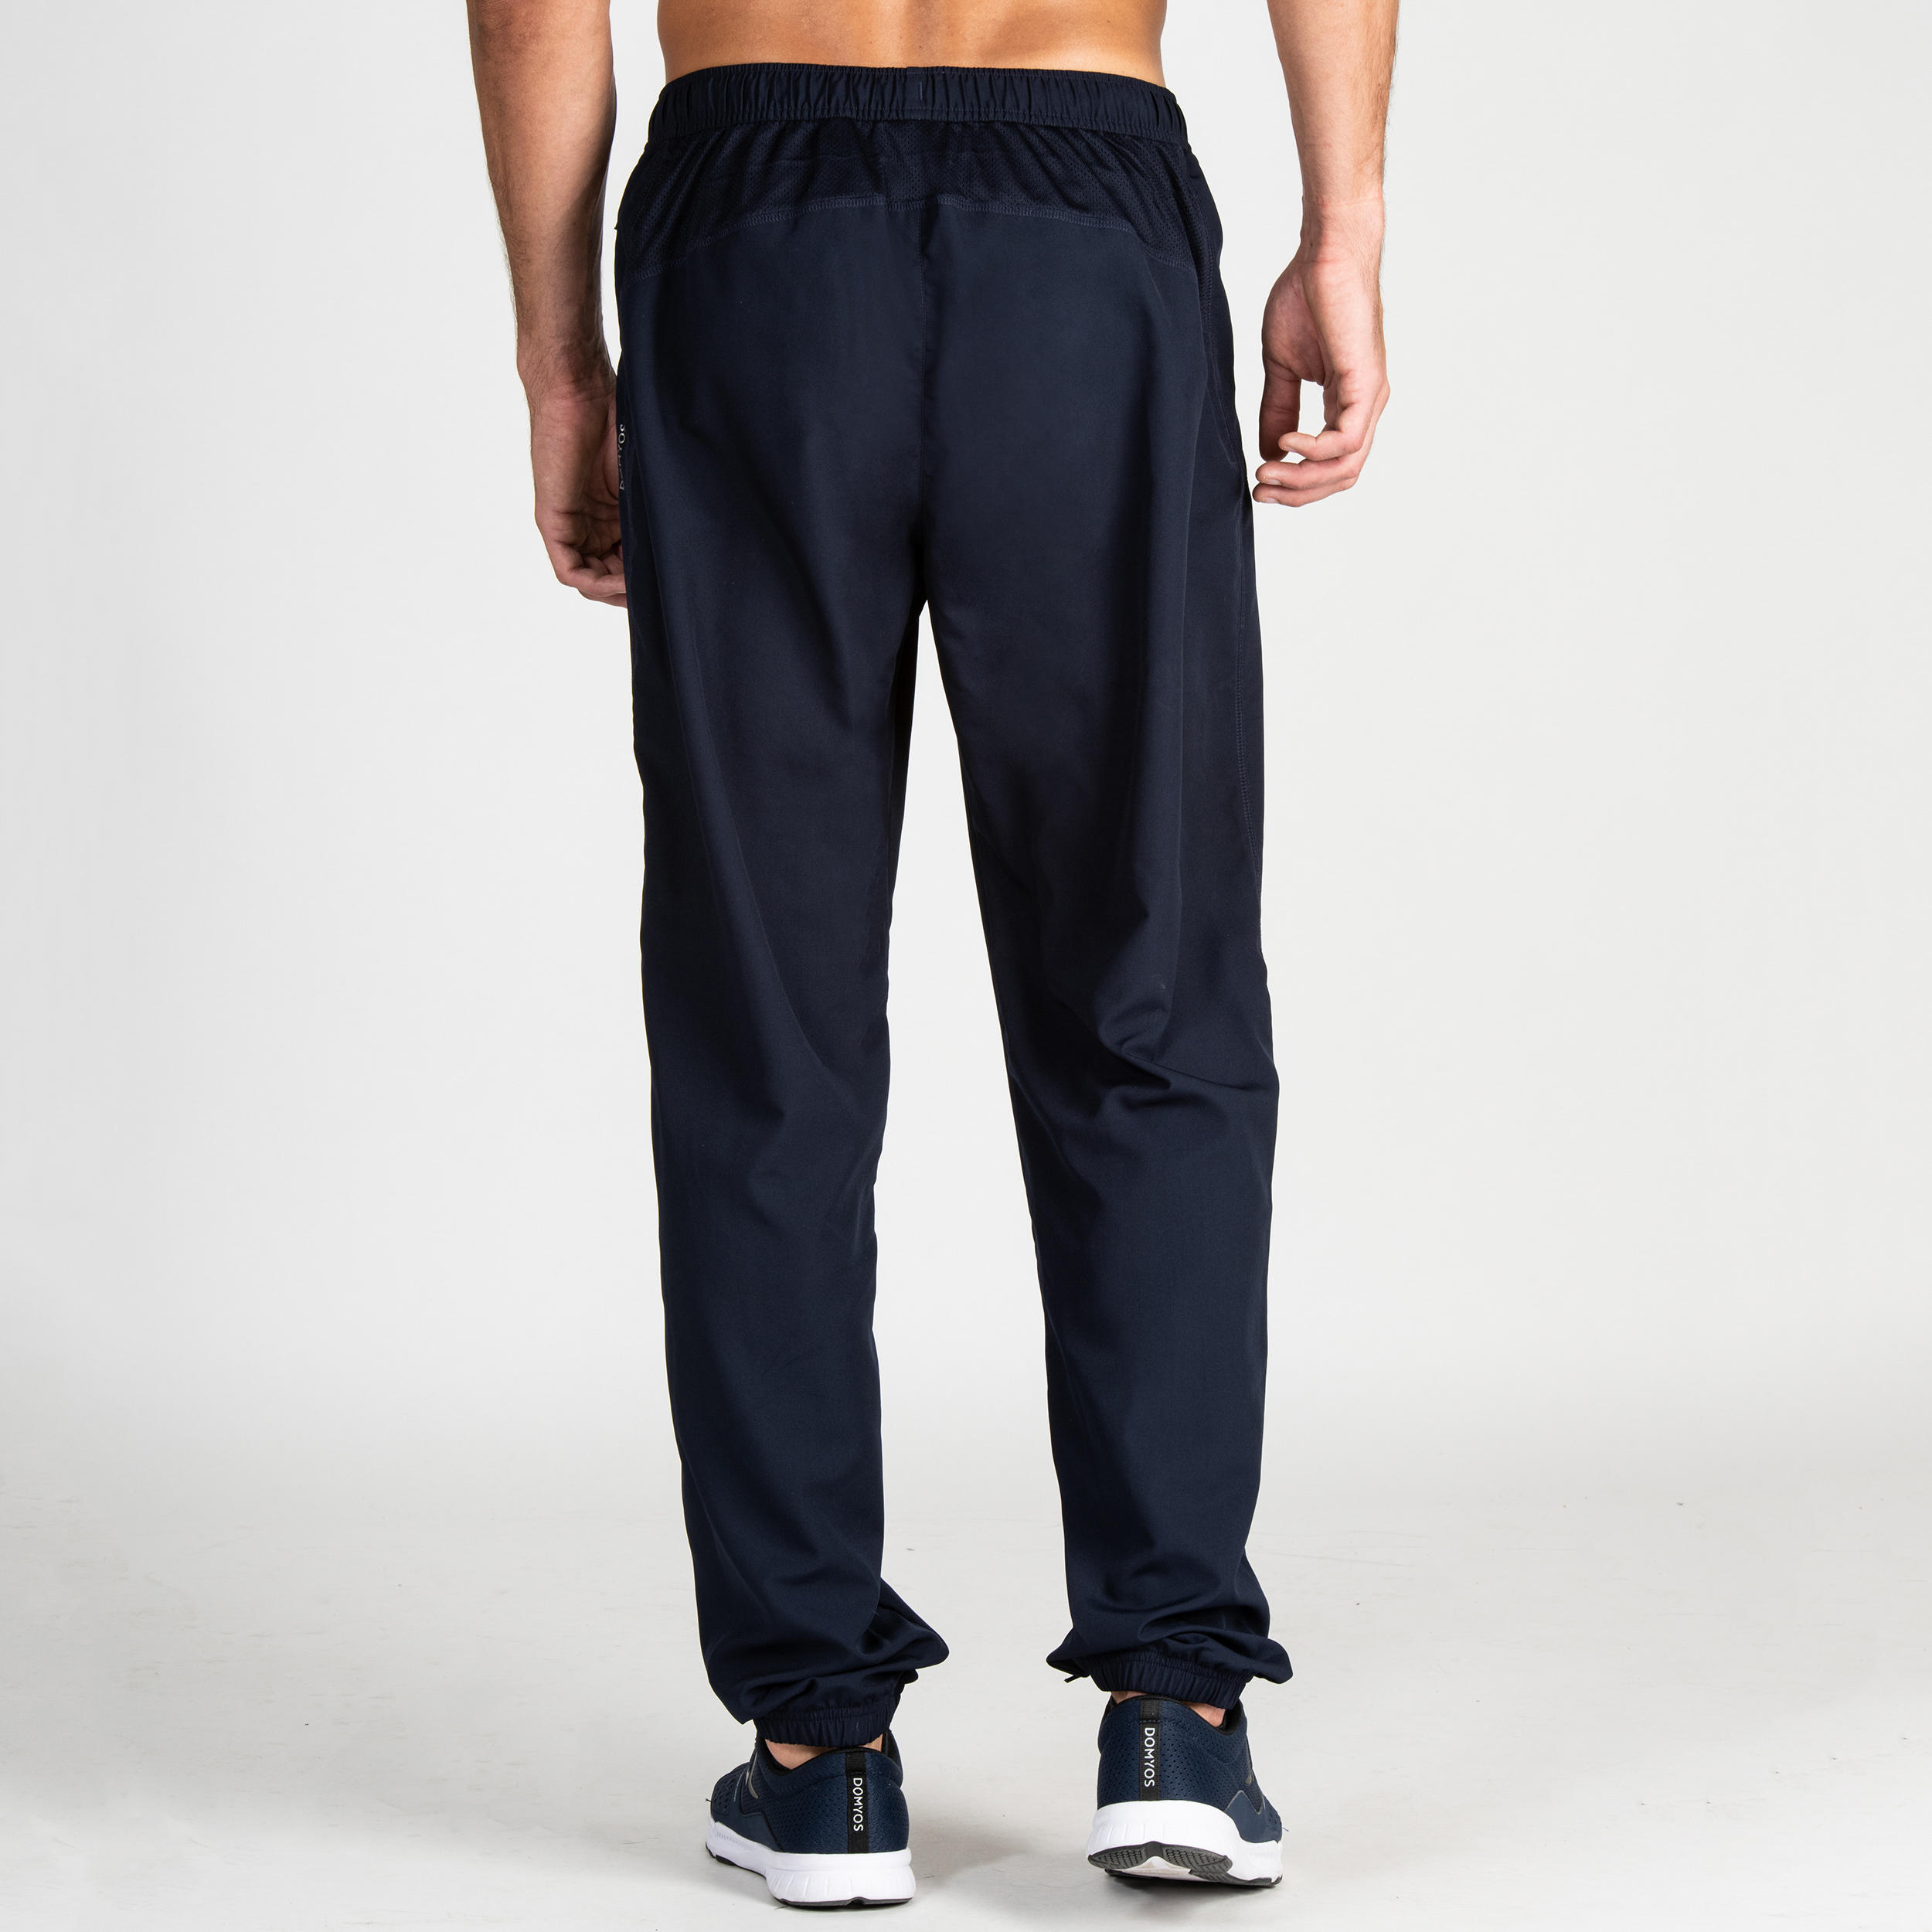 Adidas Mens Training Climacool Pants XL Raw Steel in Kakinada at best  price by Brand Central  Justdial